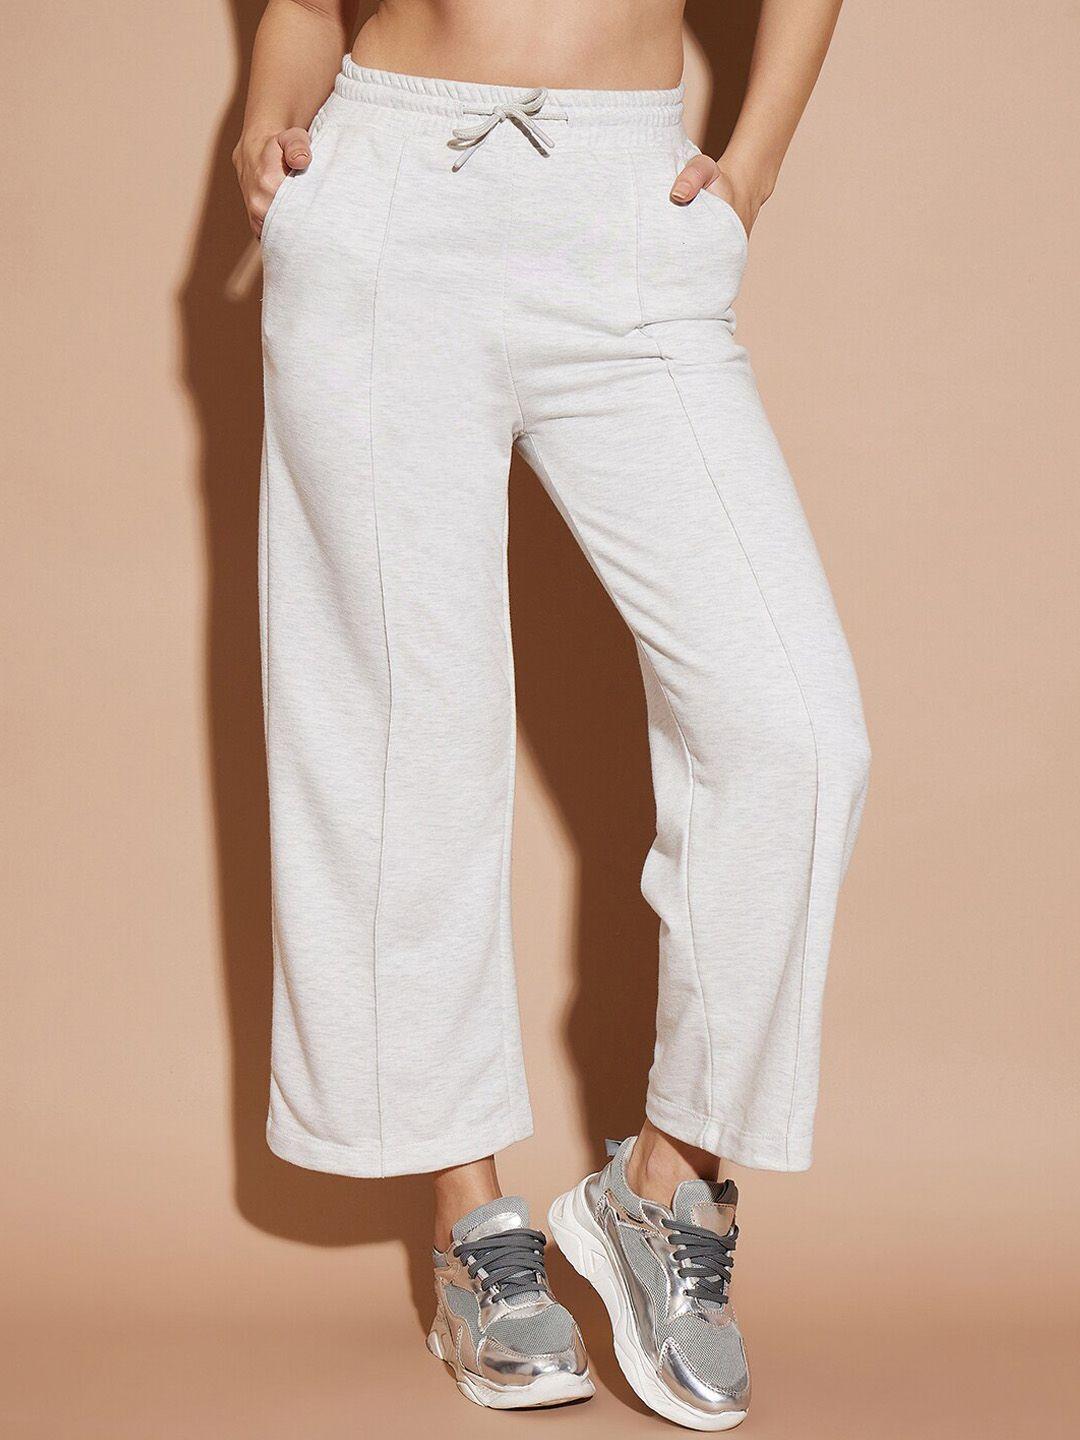 nun women relaxed fit track pants